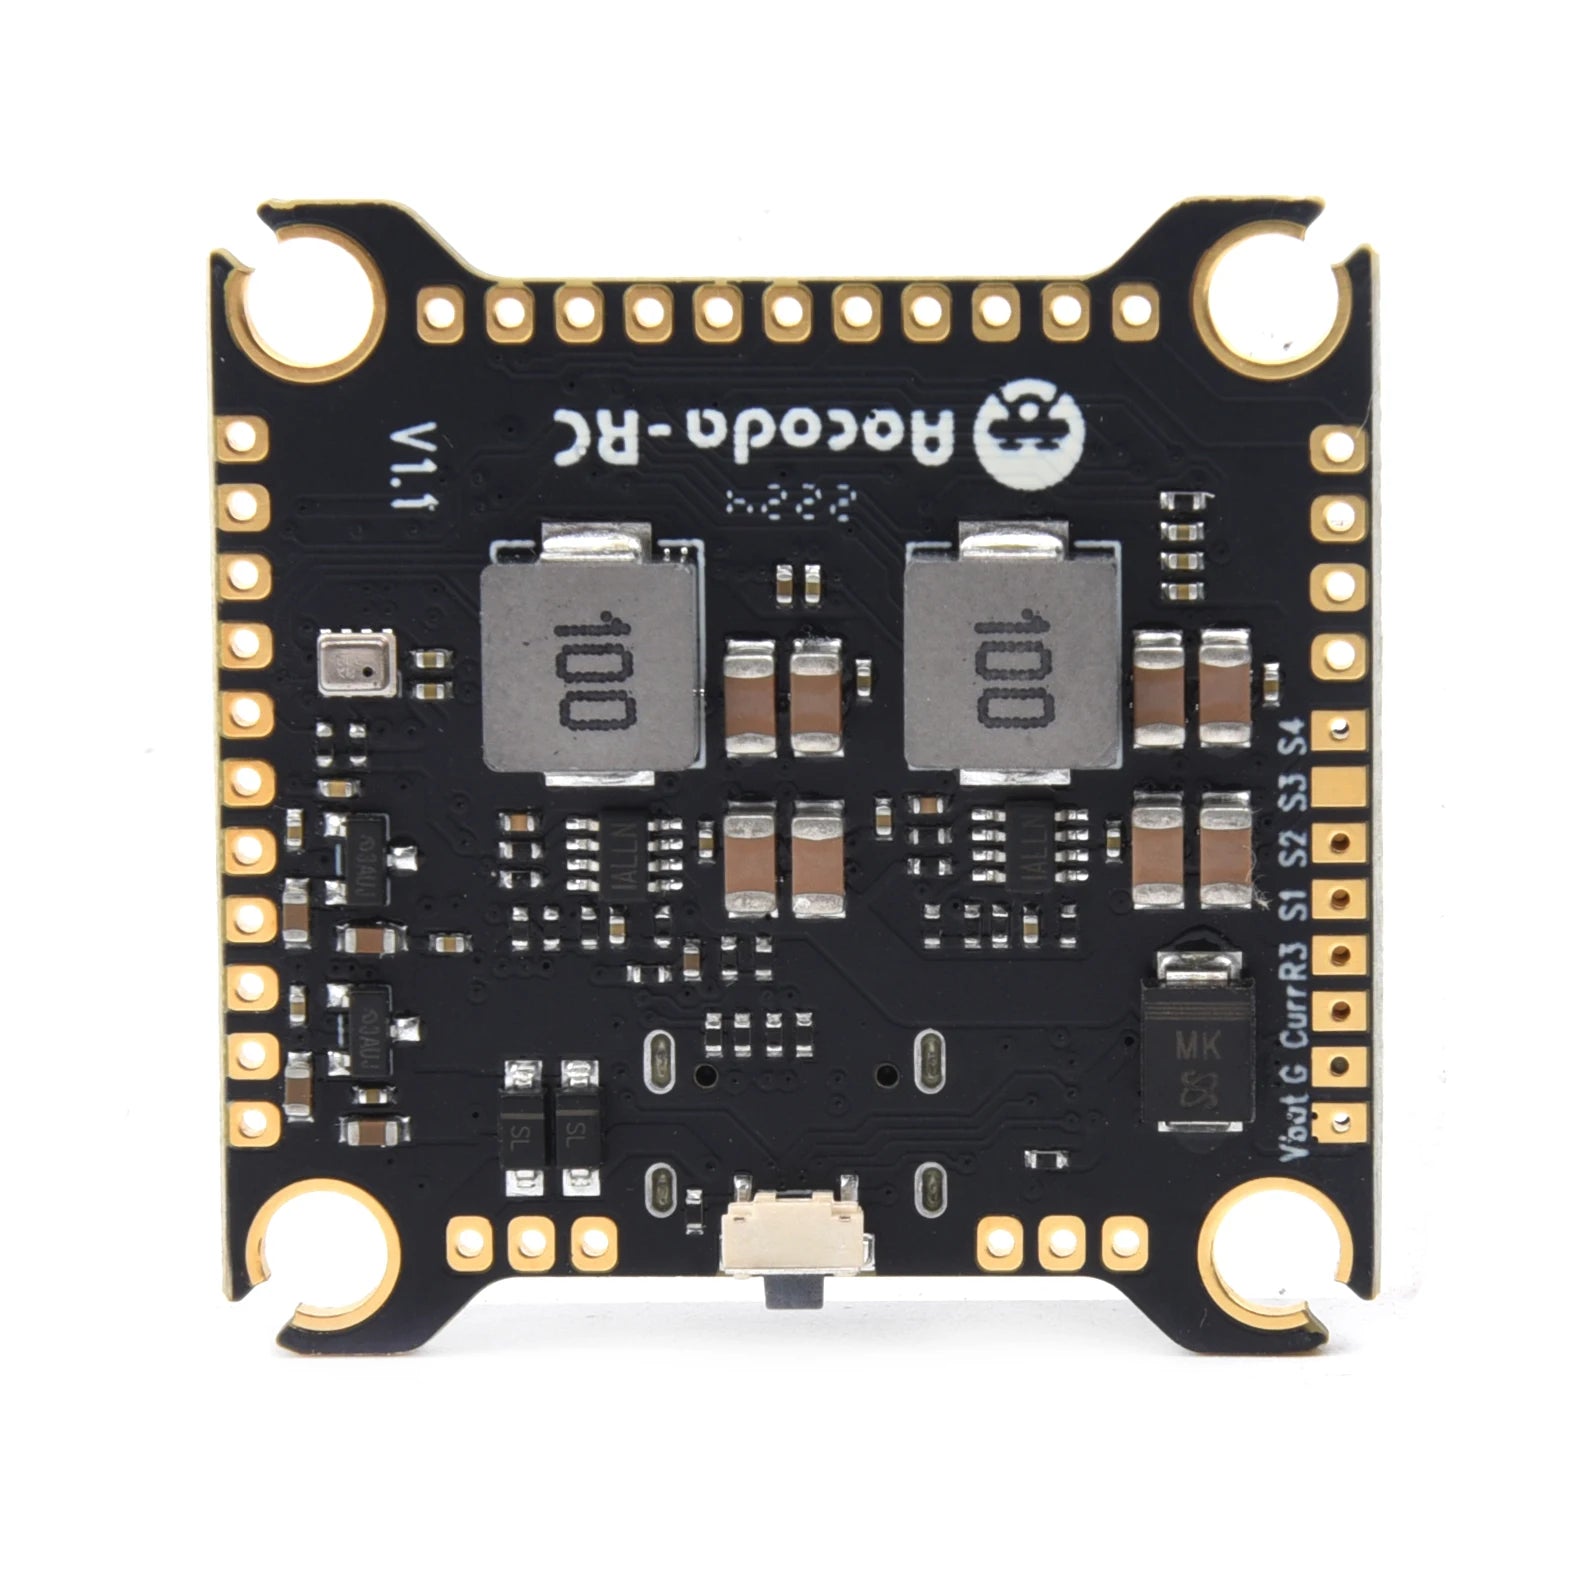 the Omnibus F3 pro comes with an OSD module, SD card reader, low noise